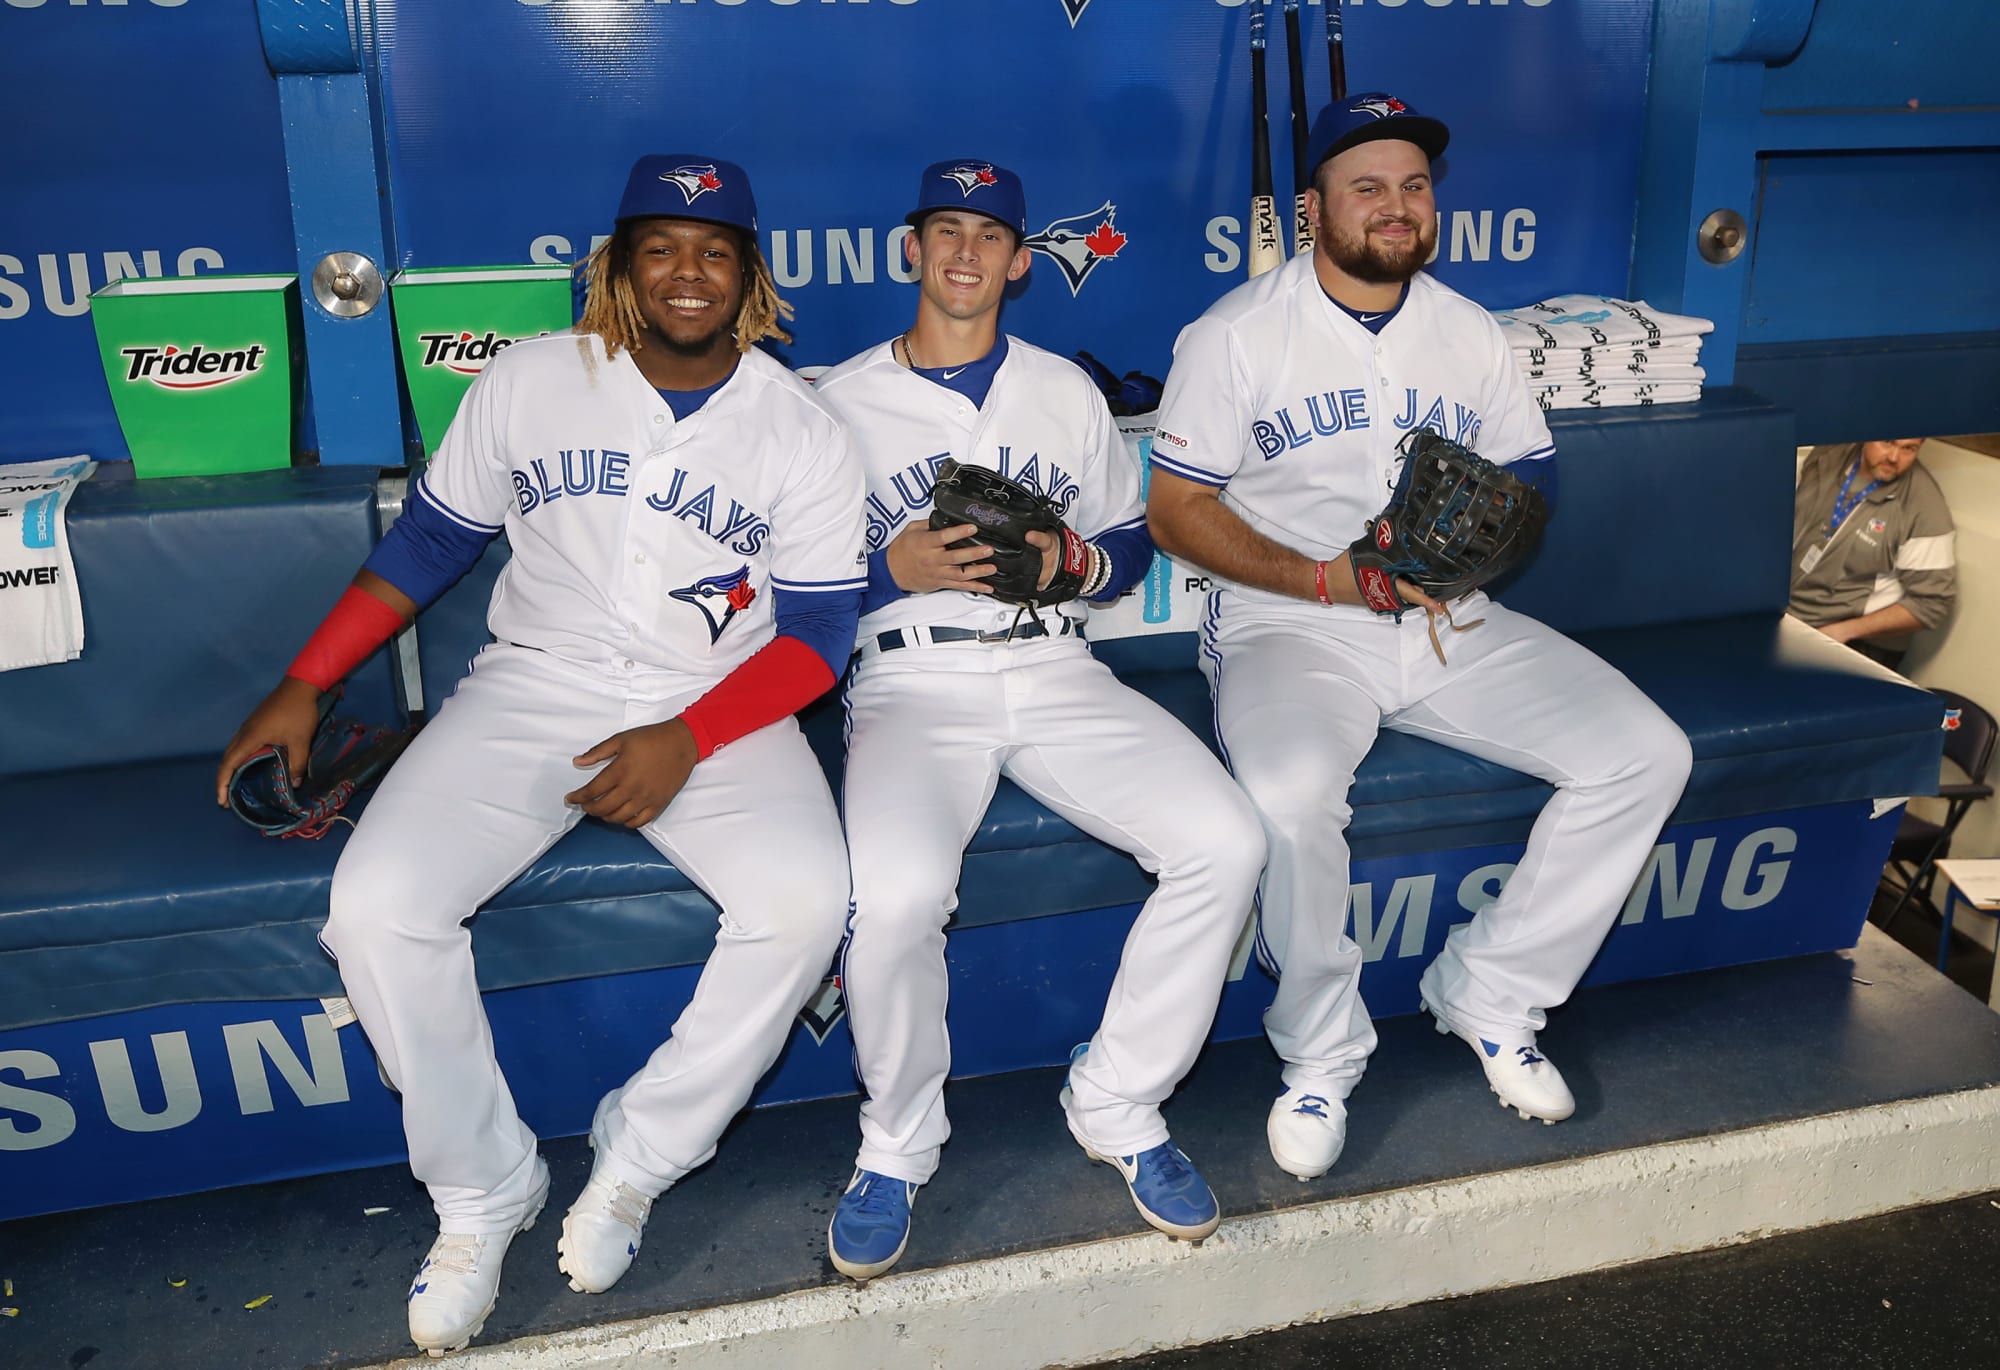 Toronto Blue Jays It is possible the team finishes last in the A.L East